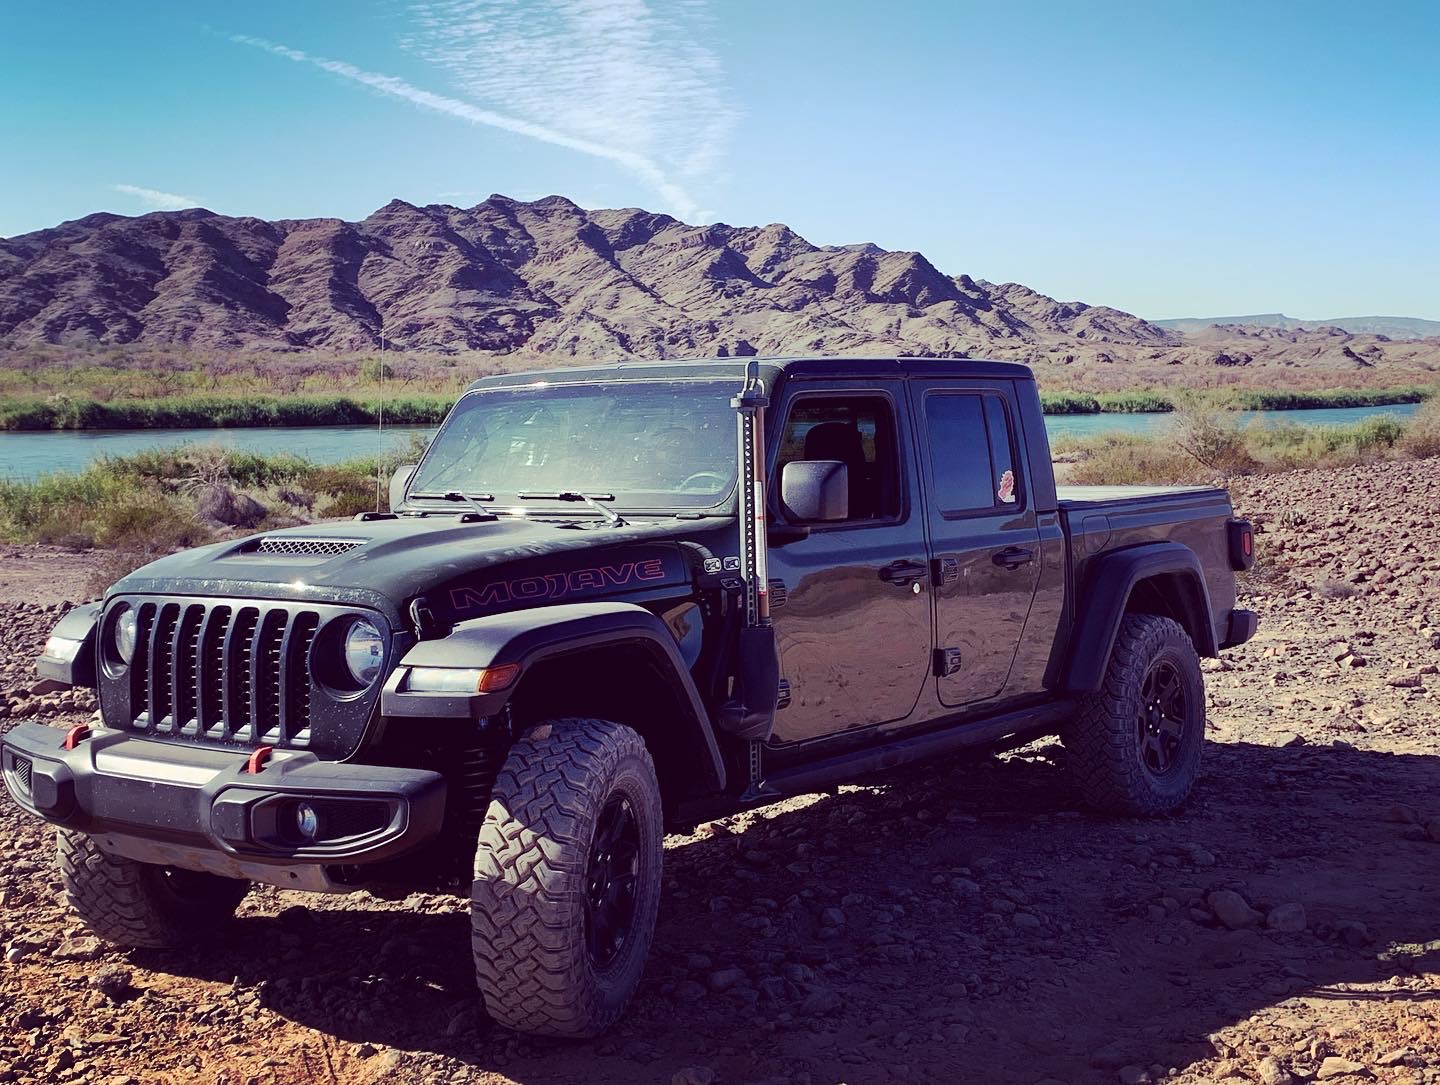 4x4 Required Adventures Jeep tour company Flagship Hondo